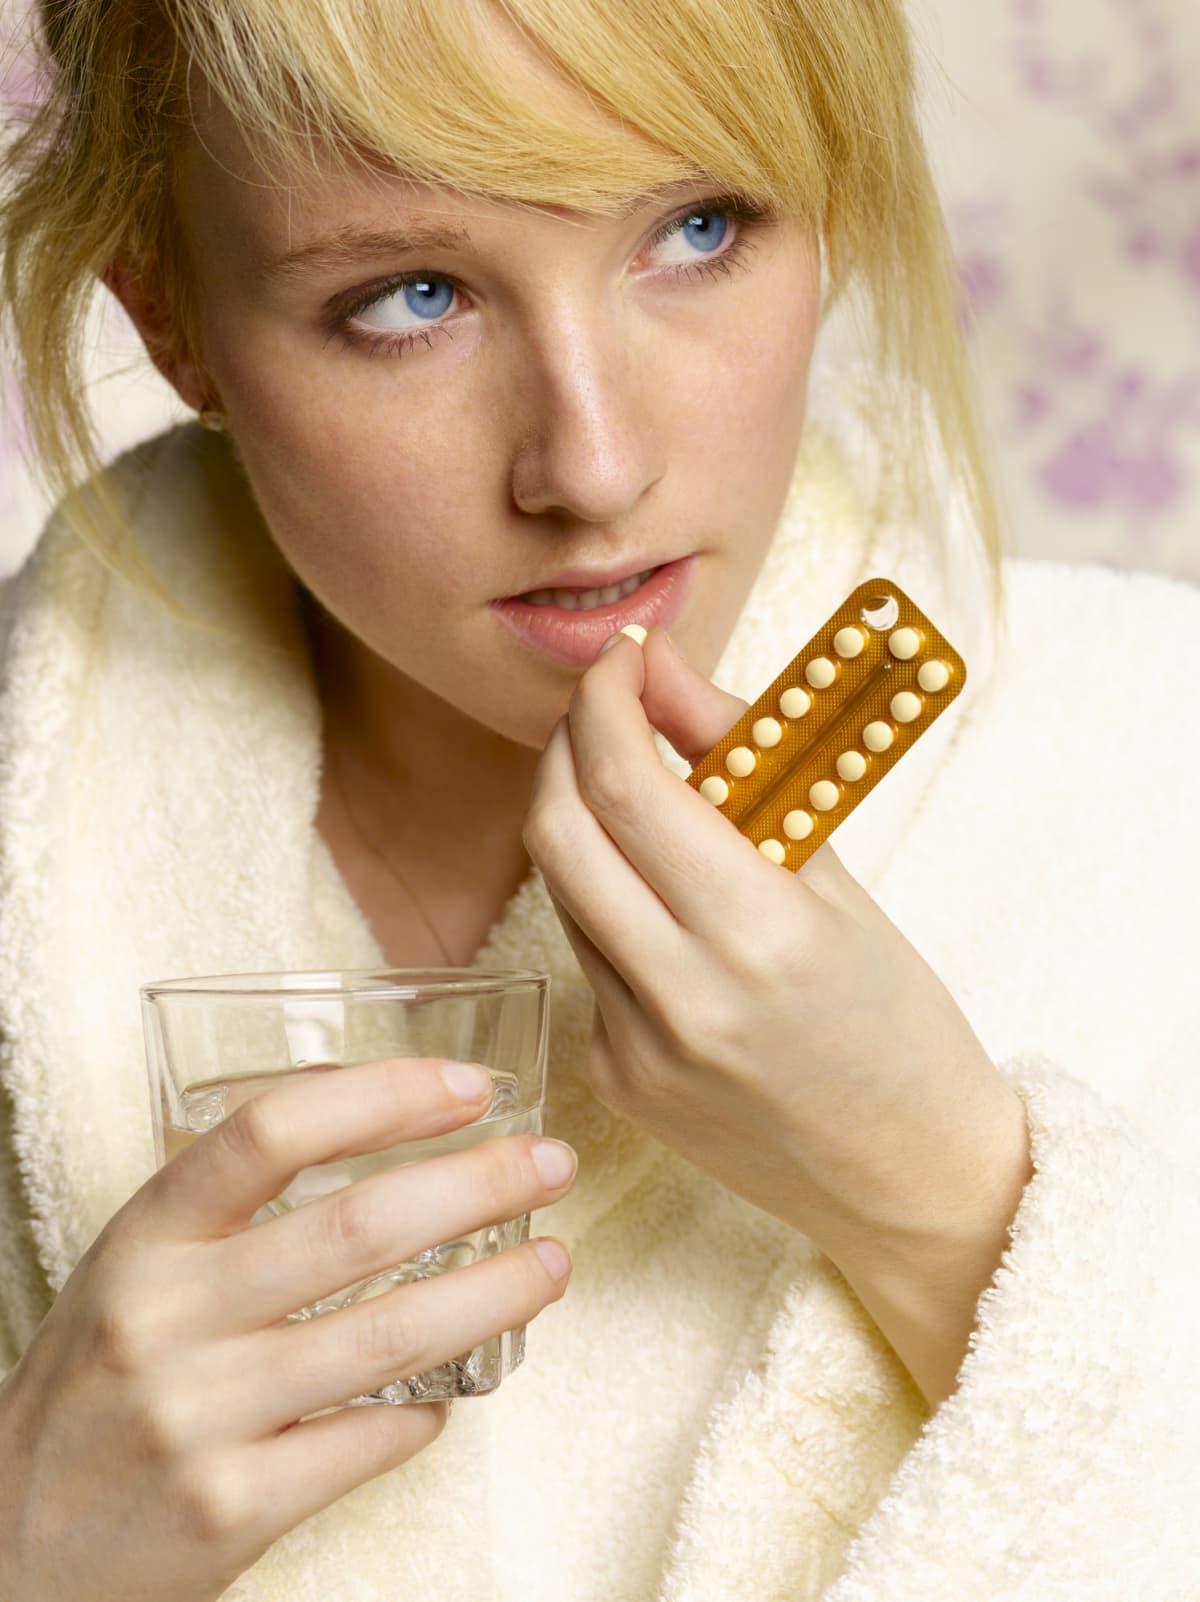 Woman taking a birth control pill as her form of contraception